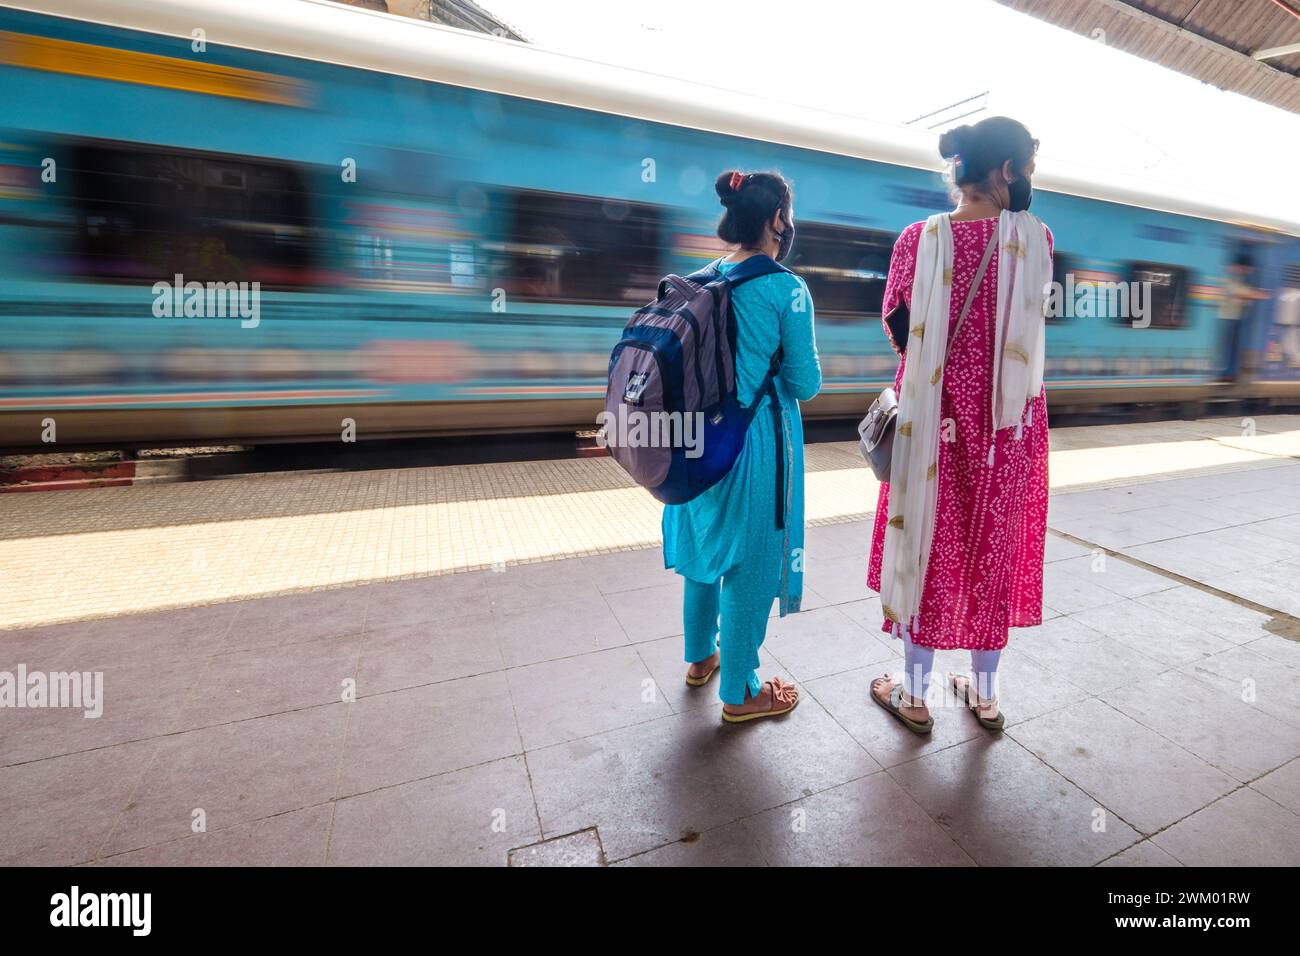 Two Indian women waiting for a train on a railway platform in Orissa, India Stock Photo